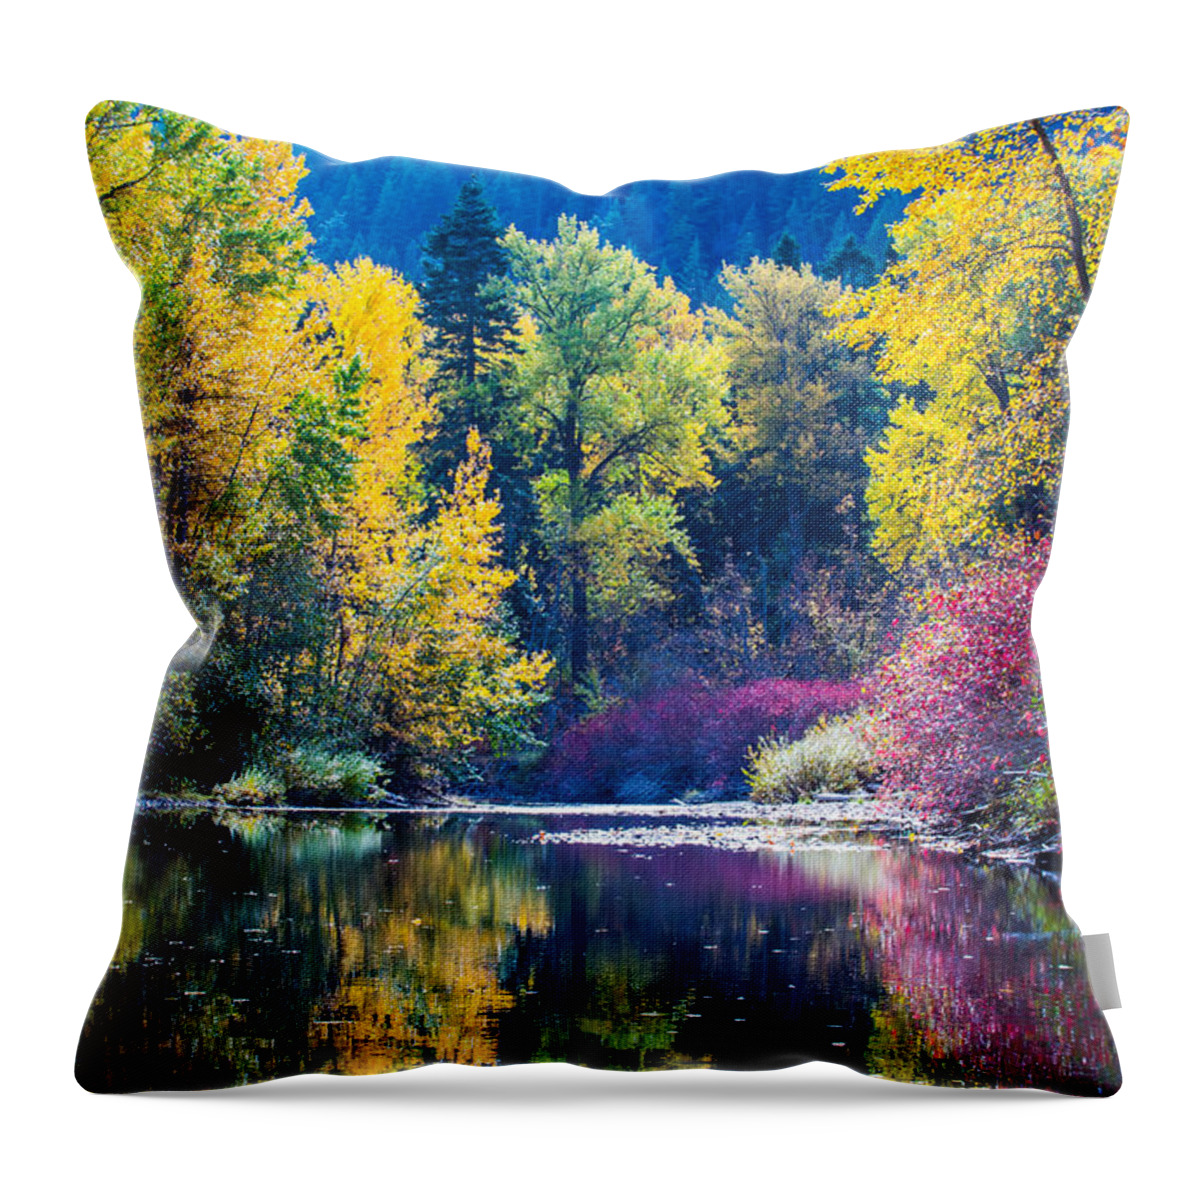 Landscape Throw Pillow featuring the photograph Fall color reflection by Hisao Mogi